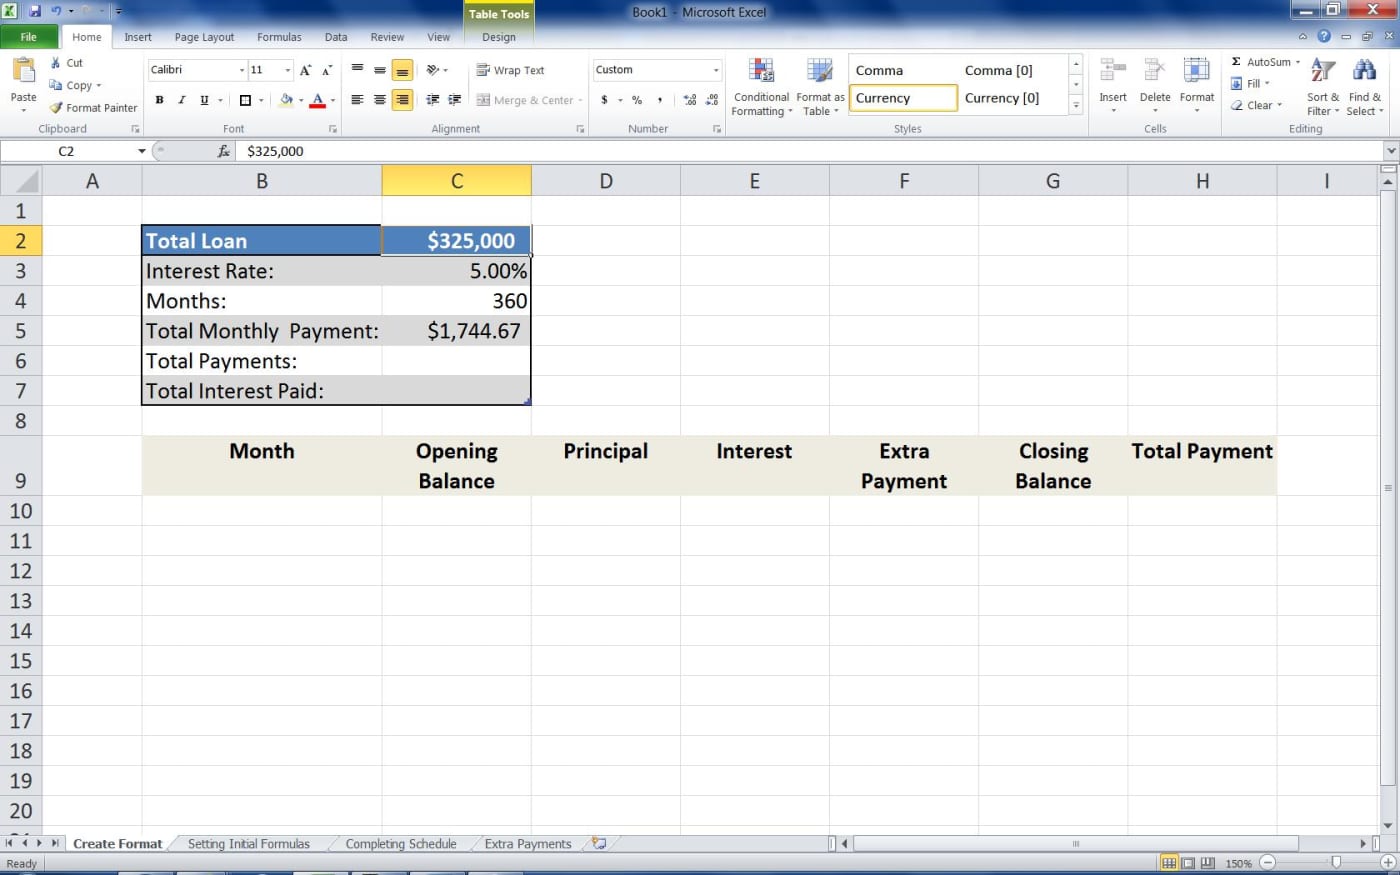 excel mortgage calculator with extra payments